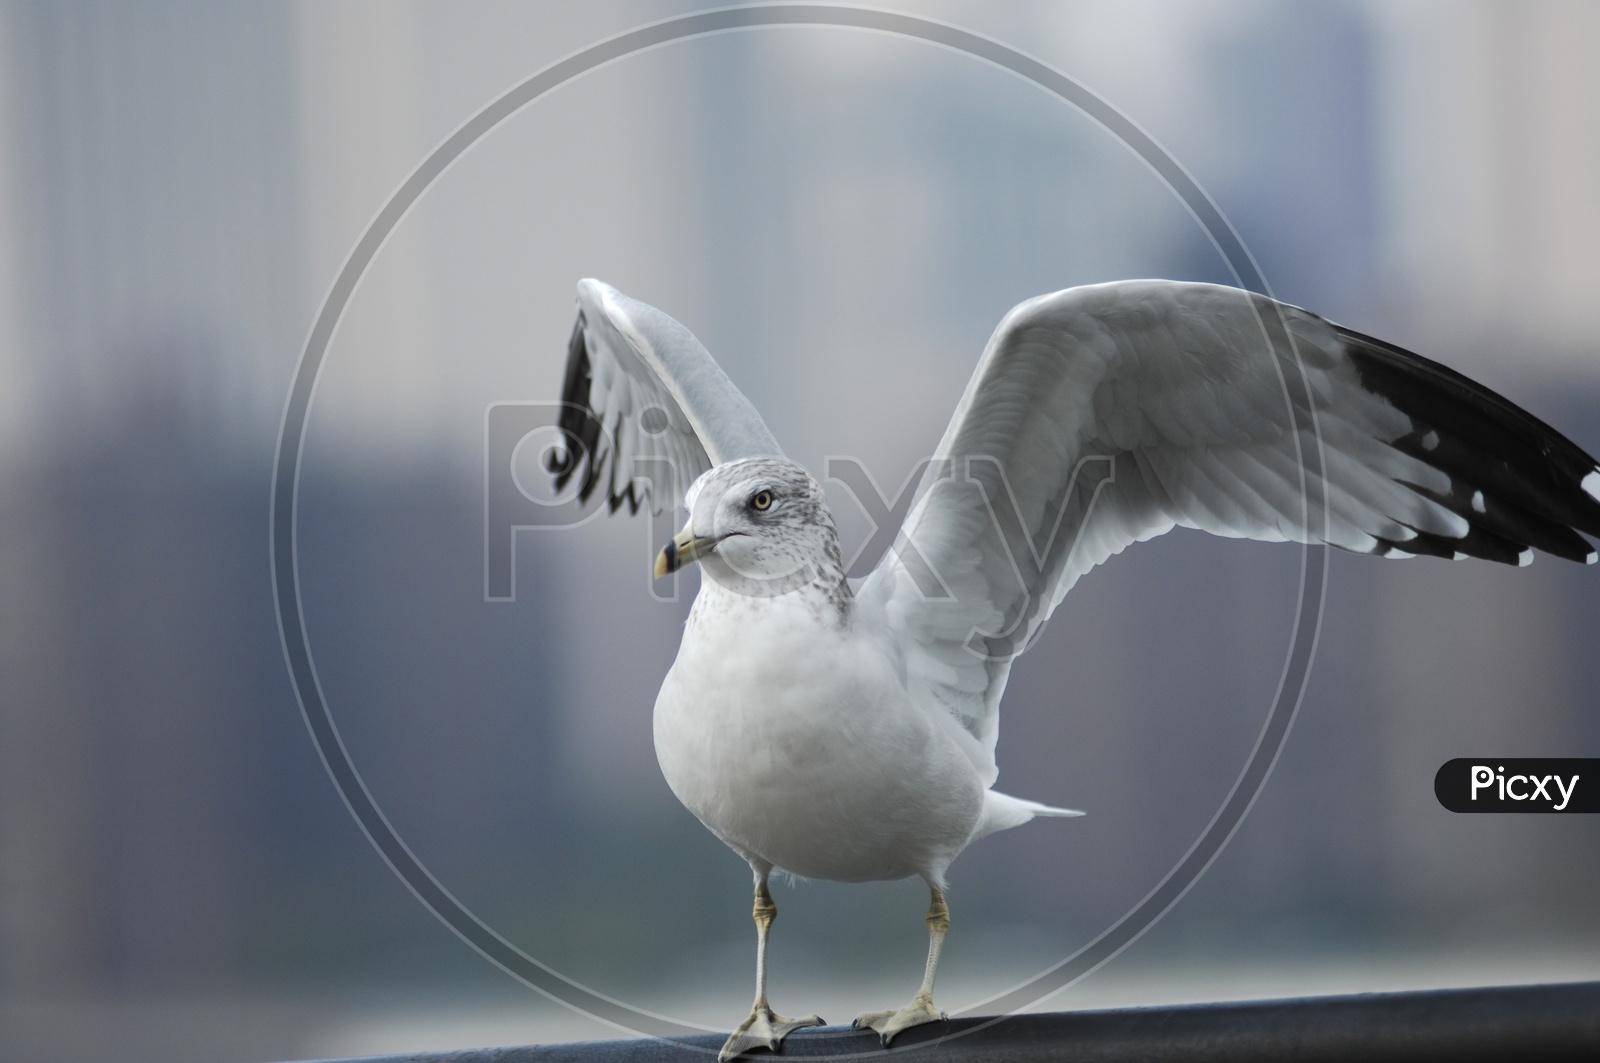 An European herring gull with its wings widespread